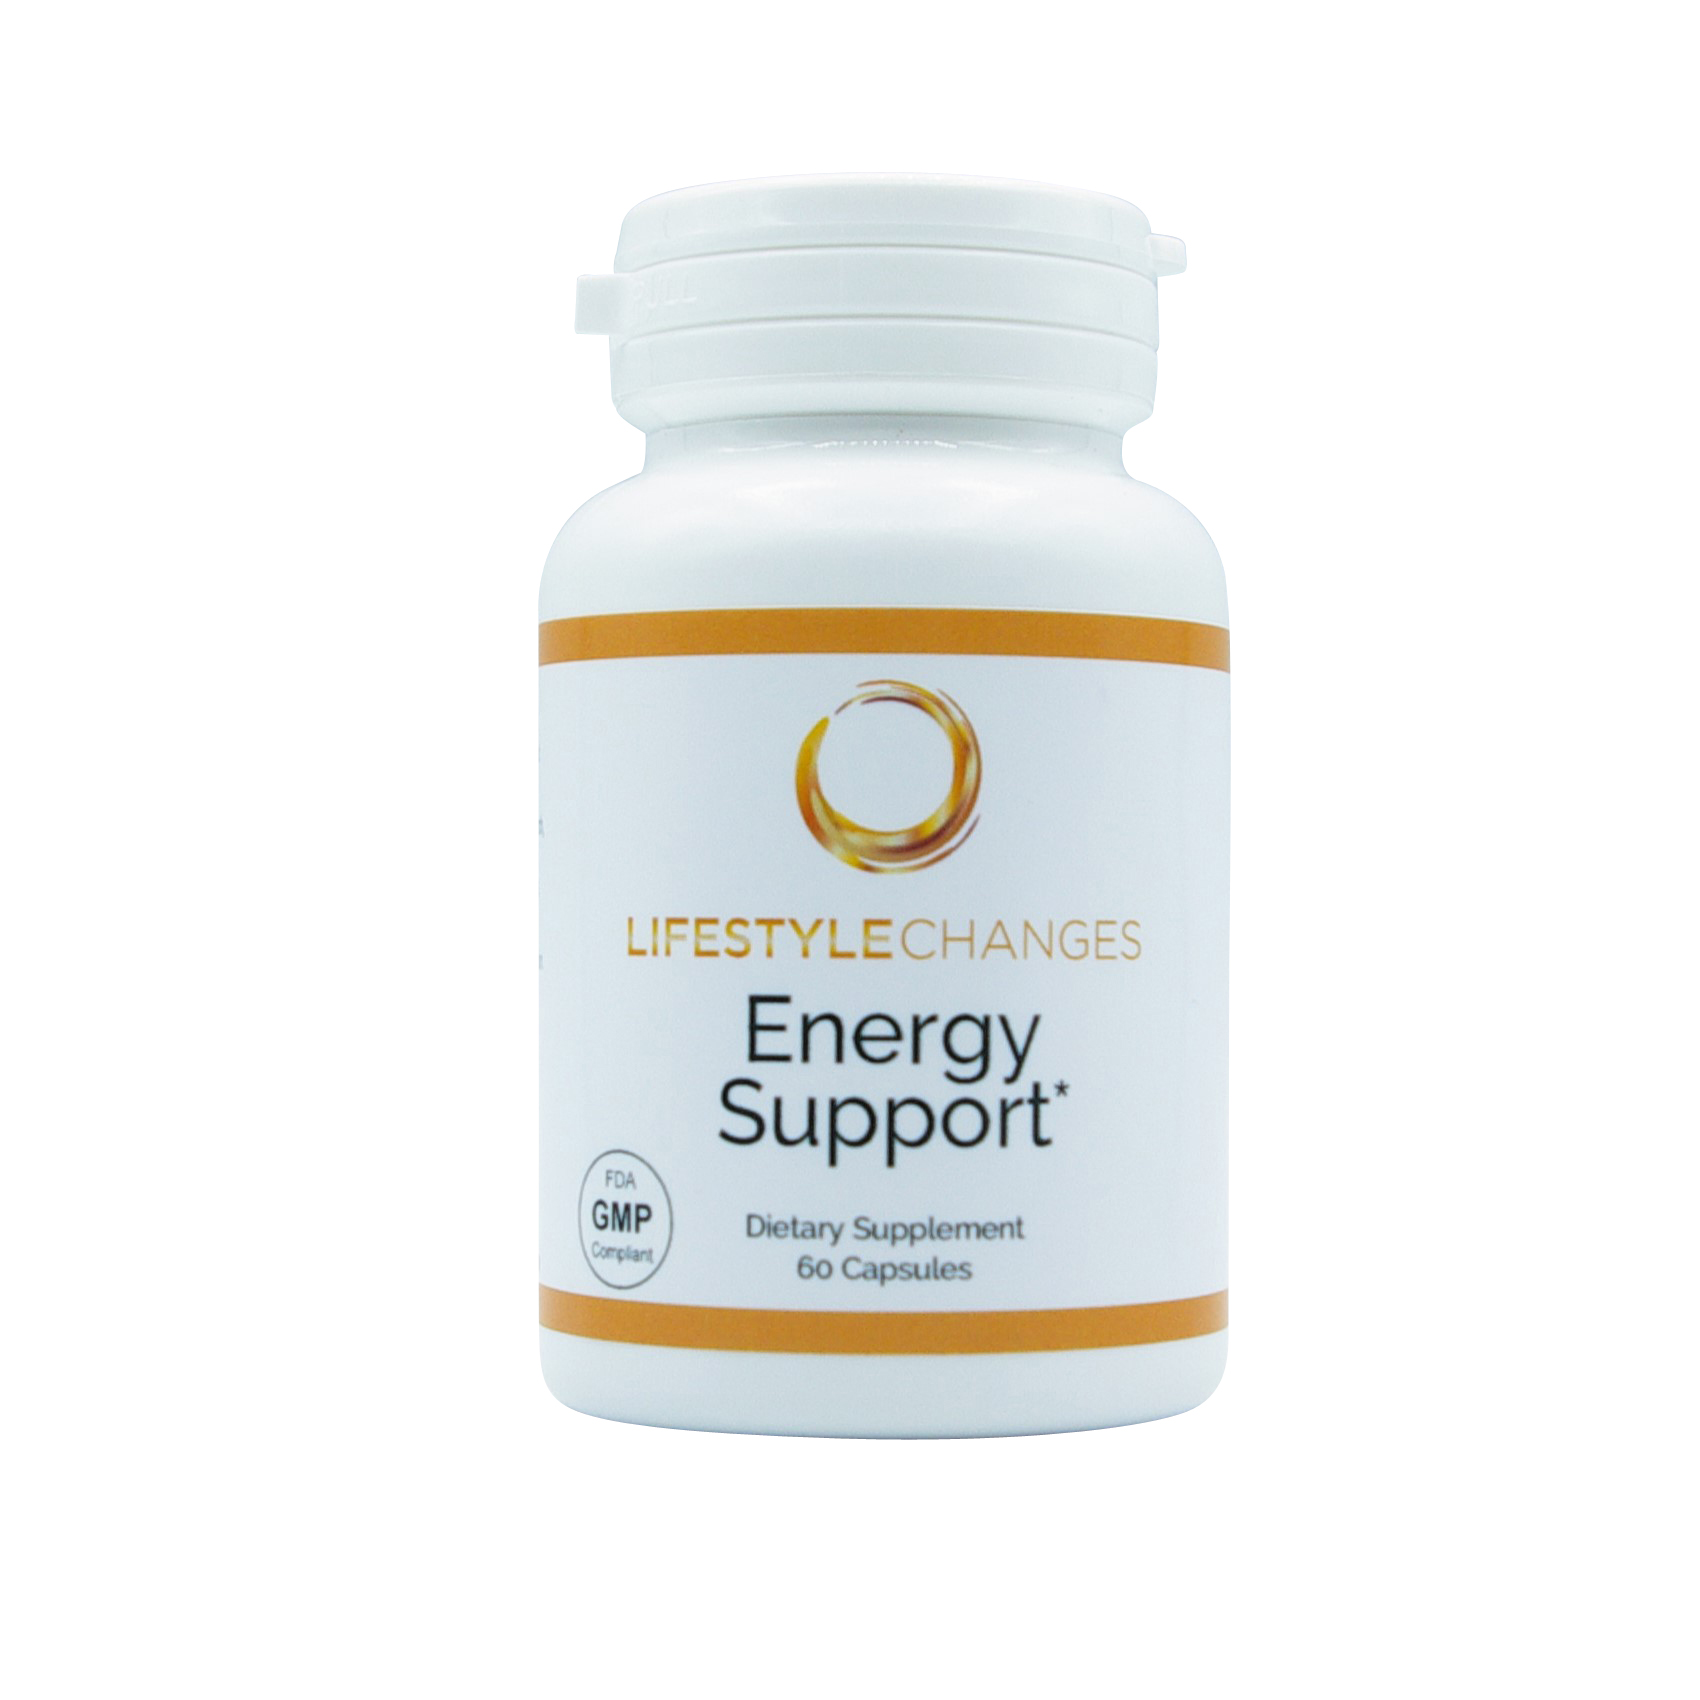 energy-support-lifestyle-changes